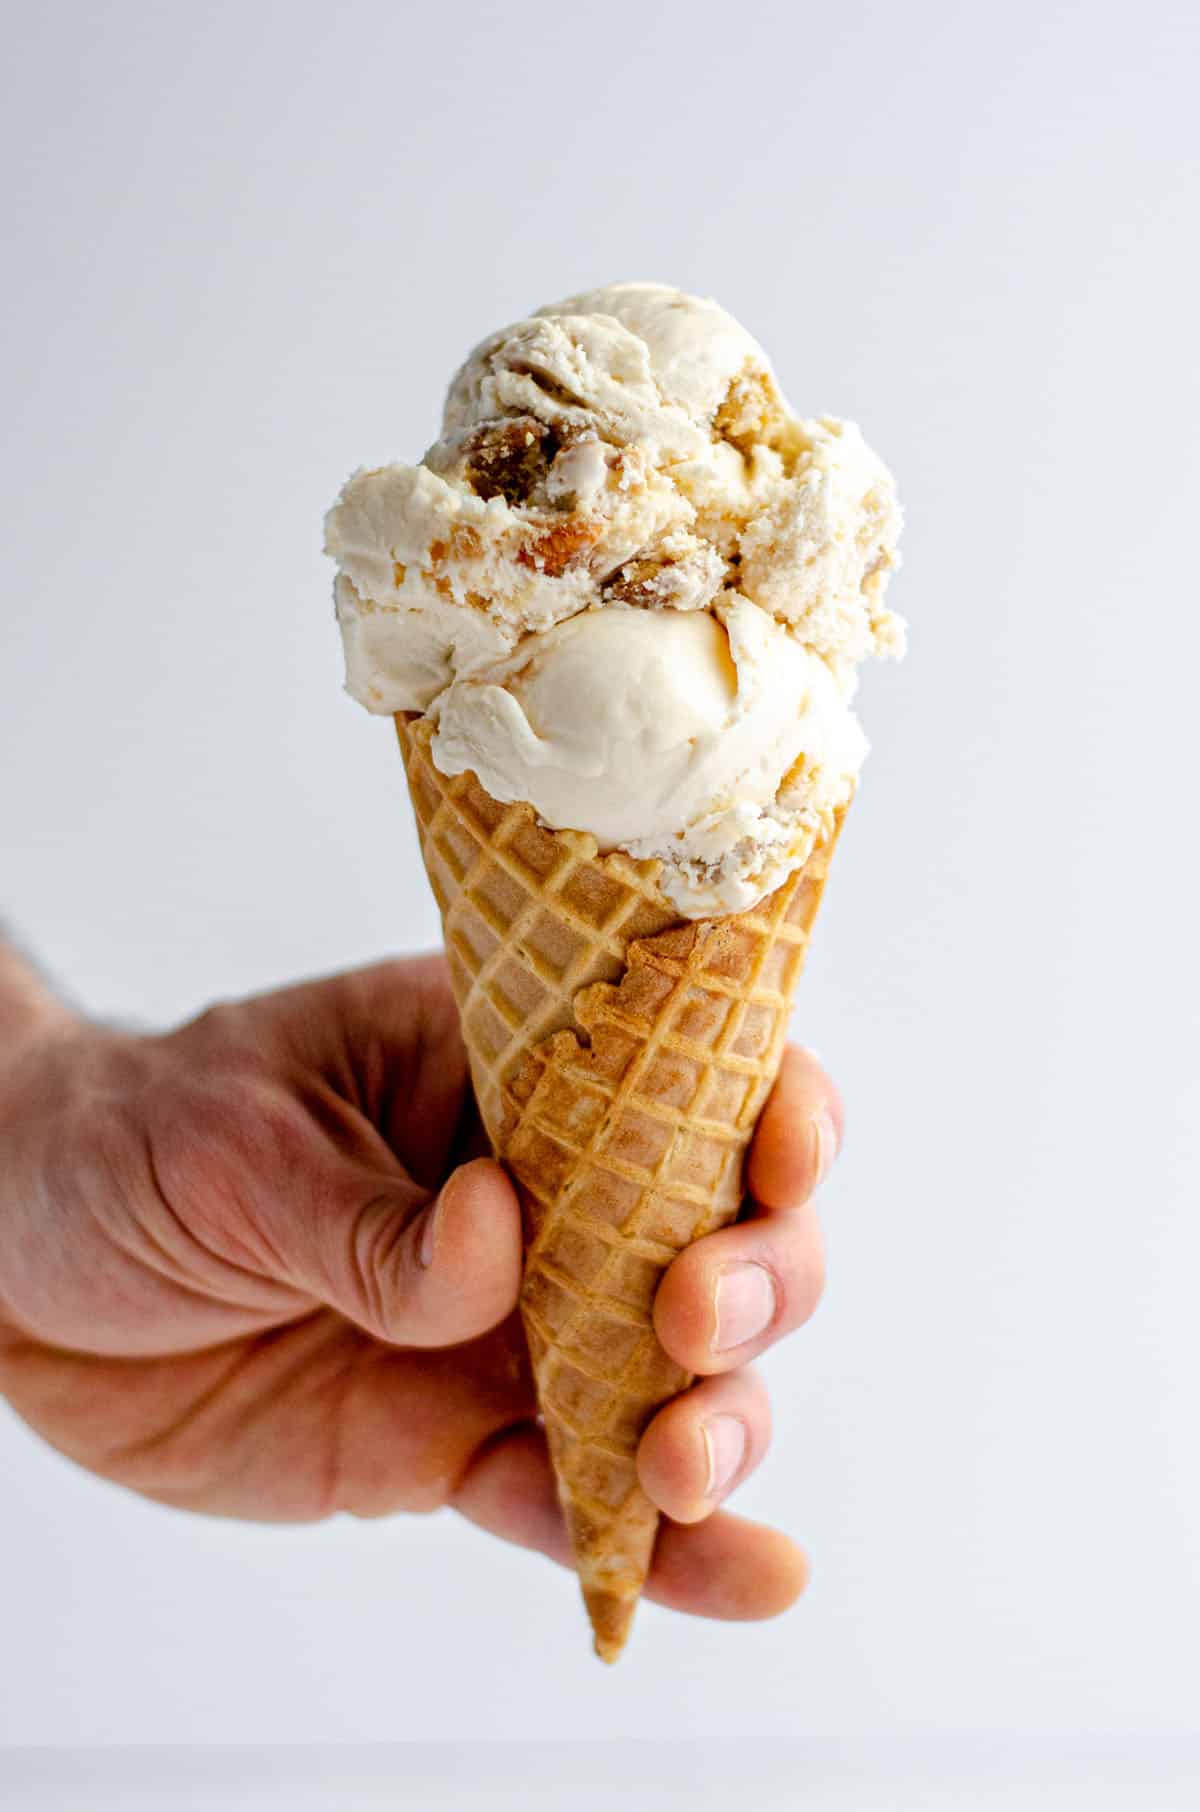 hand holding an ice cream cone filled with praline ice cream